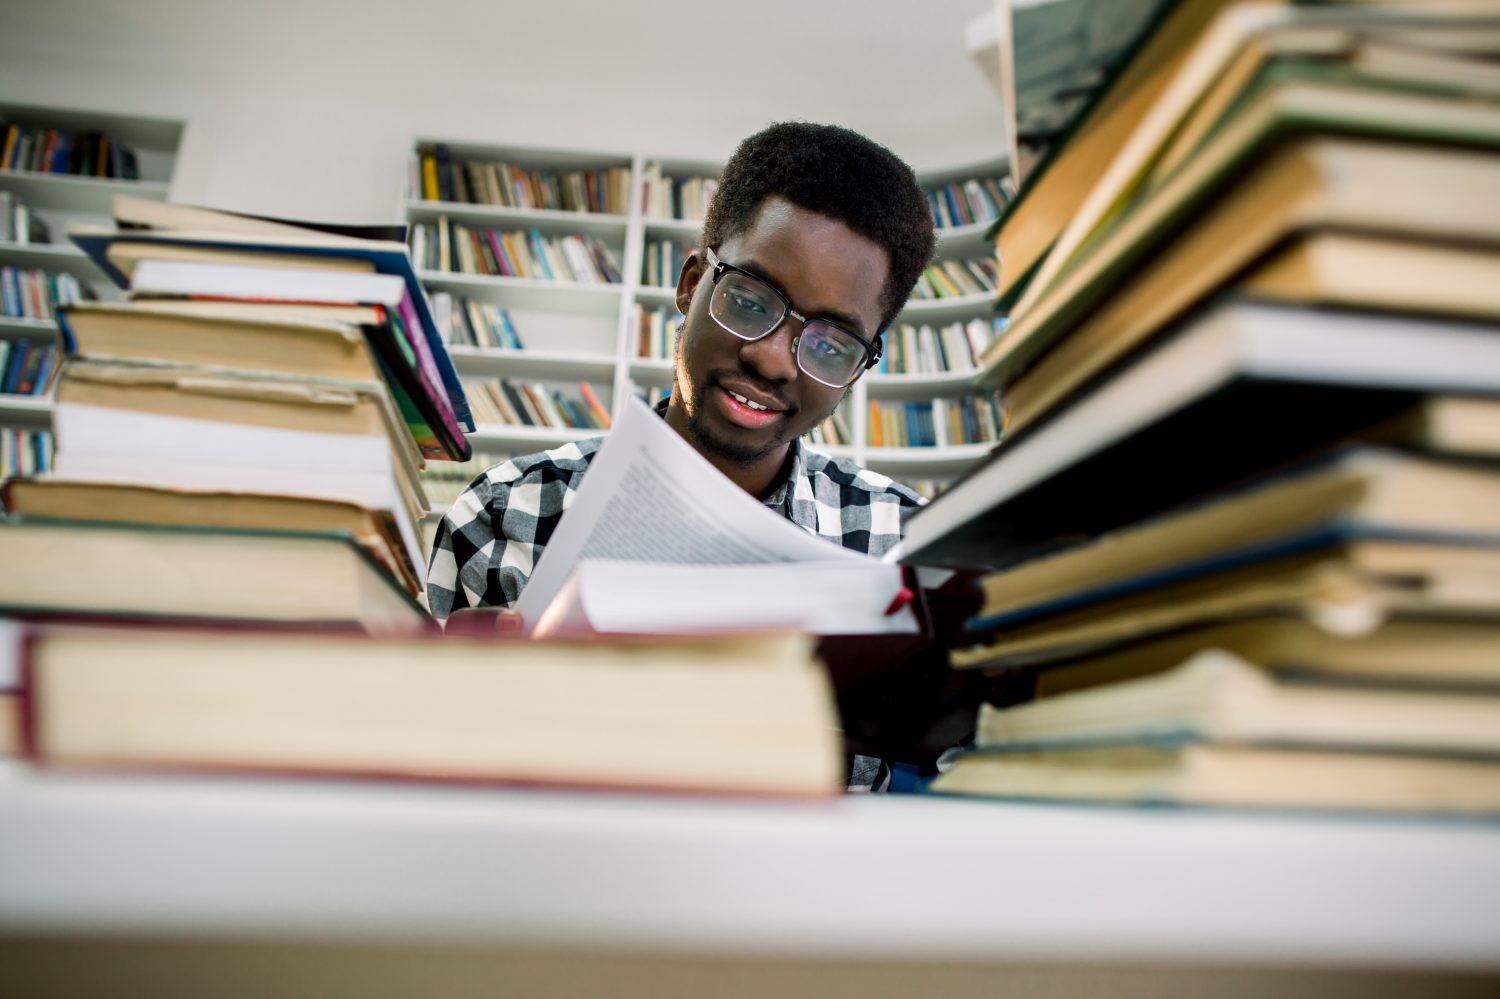 Cheerful dark skinned male student spending time on autodidact in library with book, positive african american hipster guy satisfied with interesting bestseller reading contemporary literature